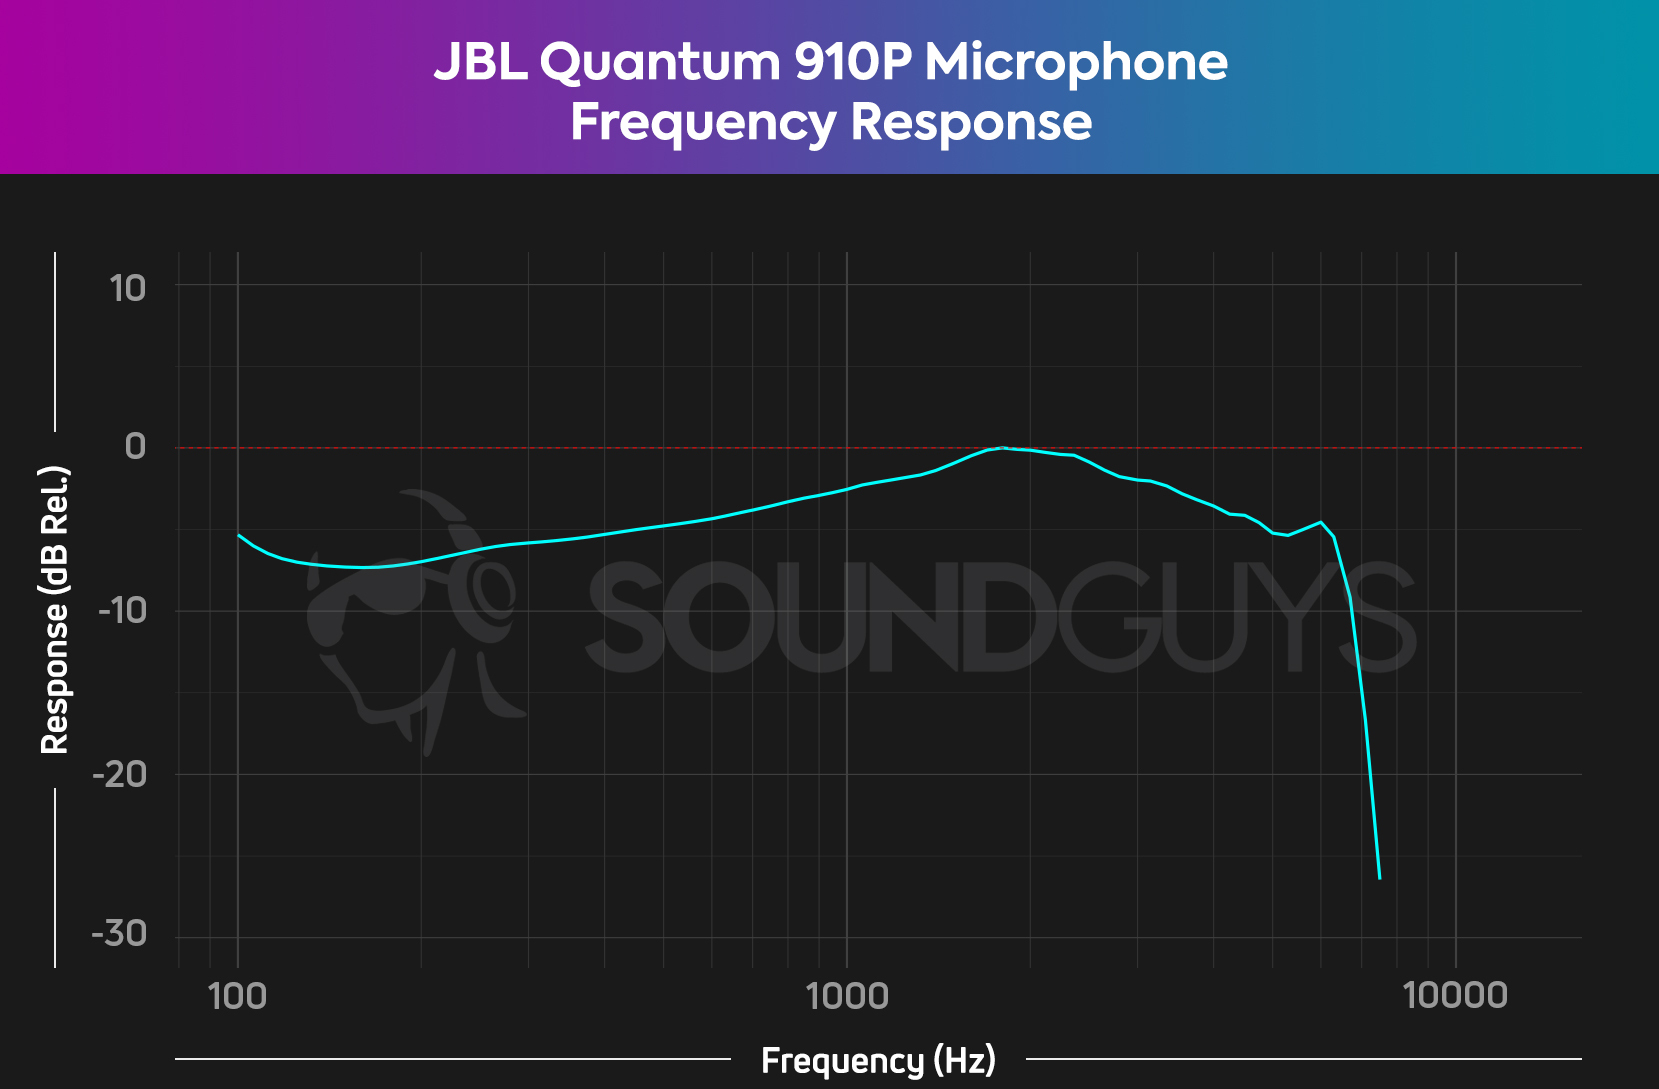 The JBL Quantum 910P microphone frequency response chart, showing a fairly flat response across the frequency range.